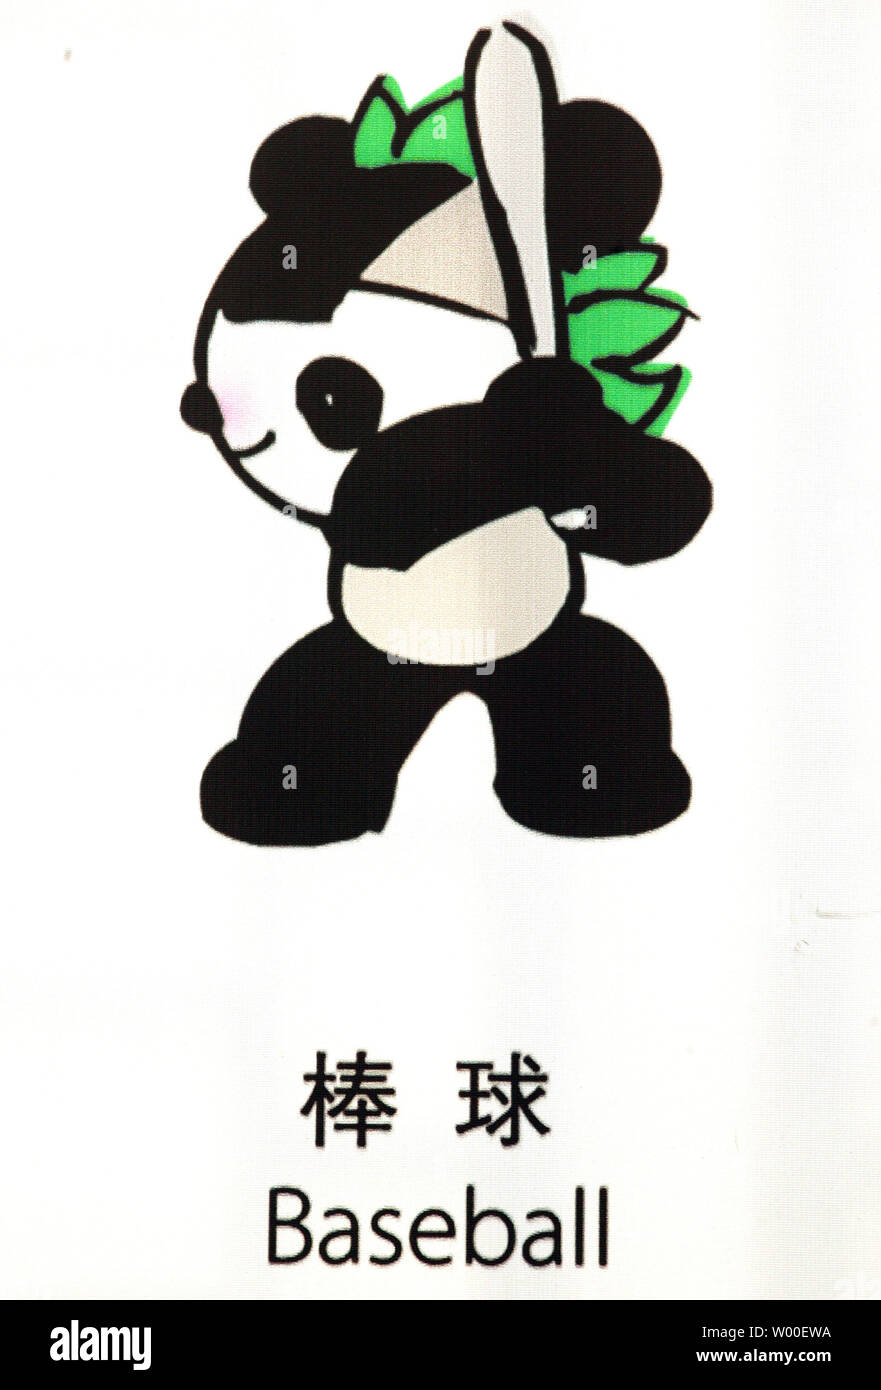 Jingjing the Panda, one of the mascots for the 2008 Summer Olympics to be held in Beijing, is depicted competing in Baseball.     (UPI Photo/Stephen Shaver) Stock Photo